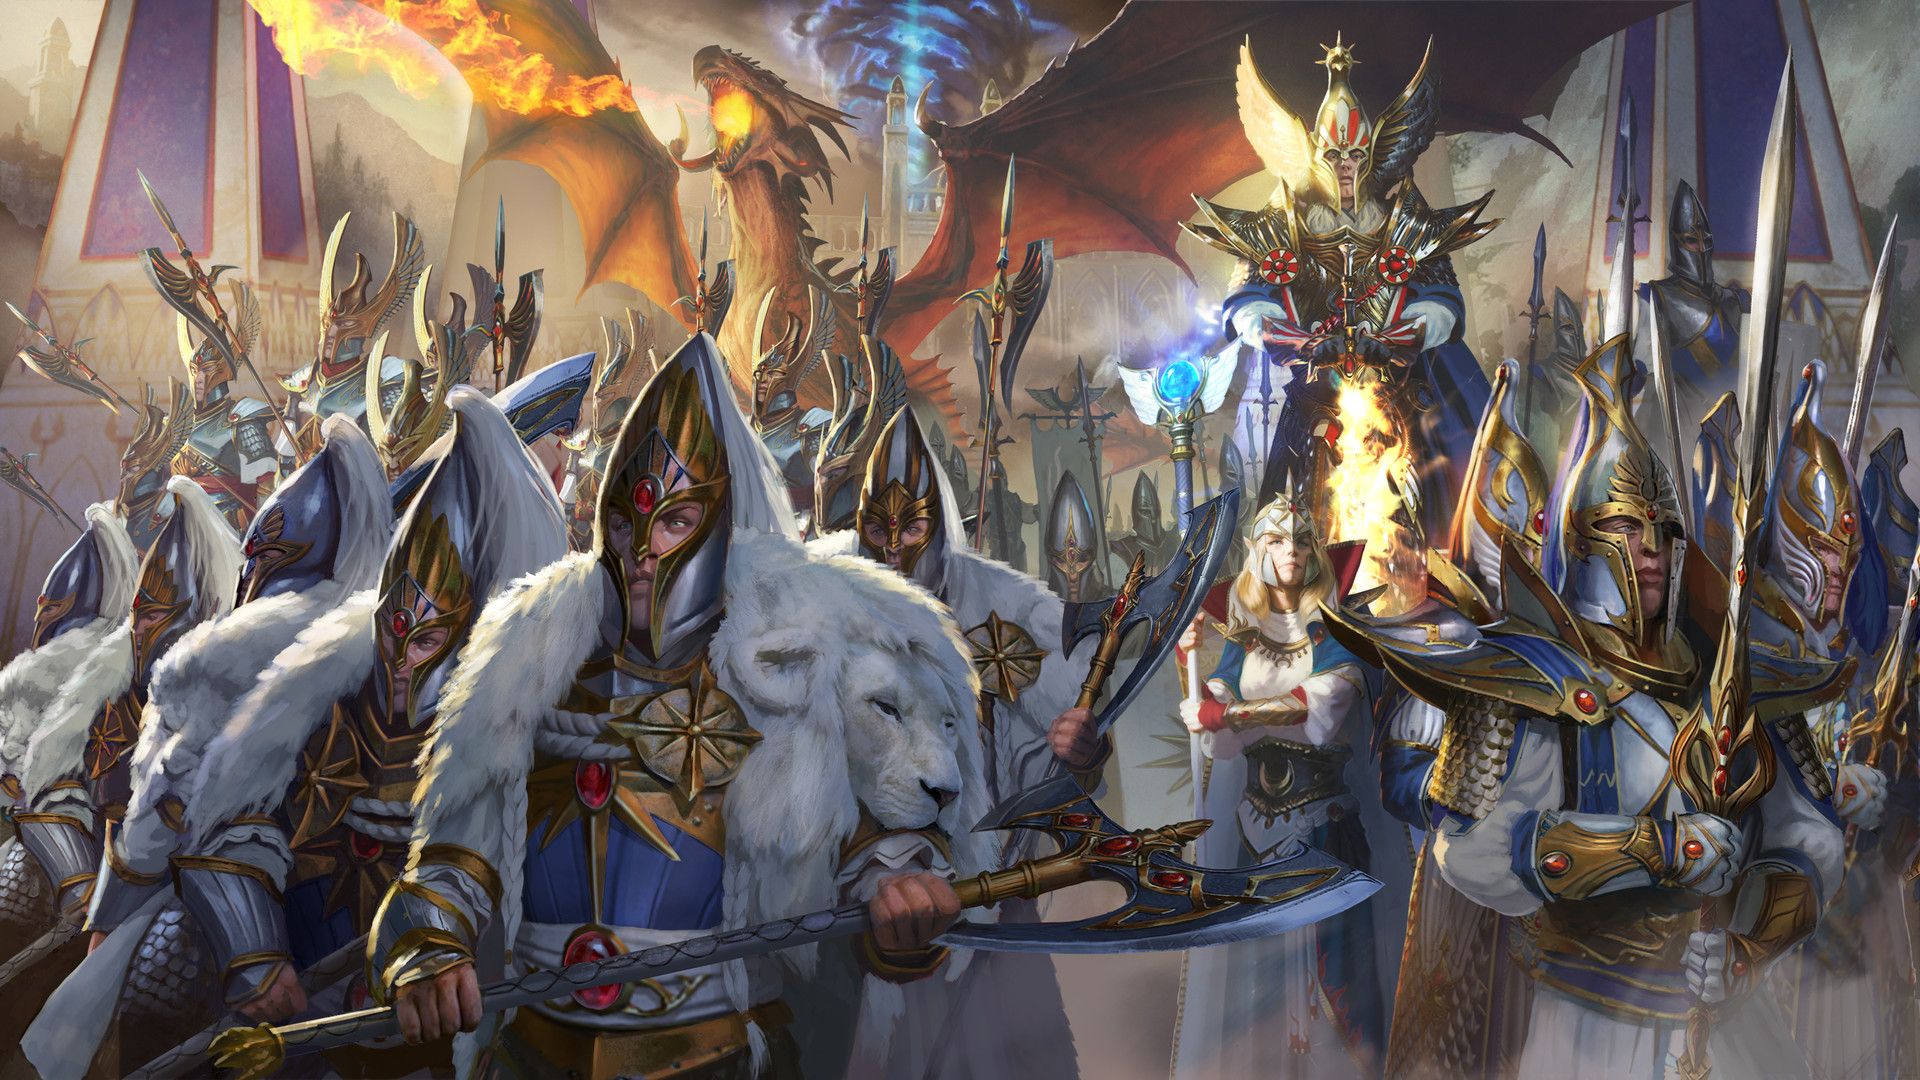 Let's share some Warhammer wallpaper